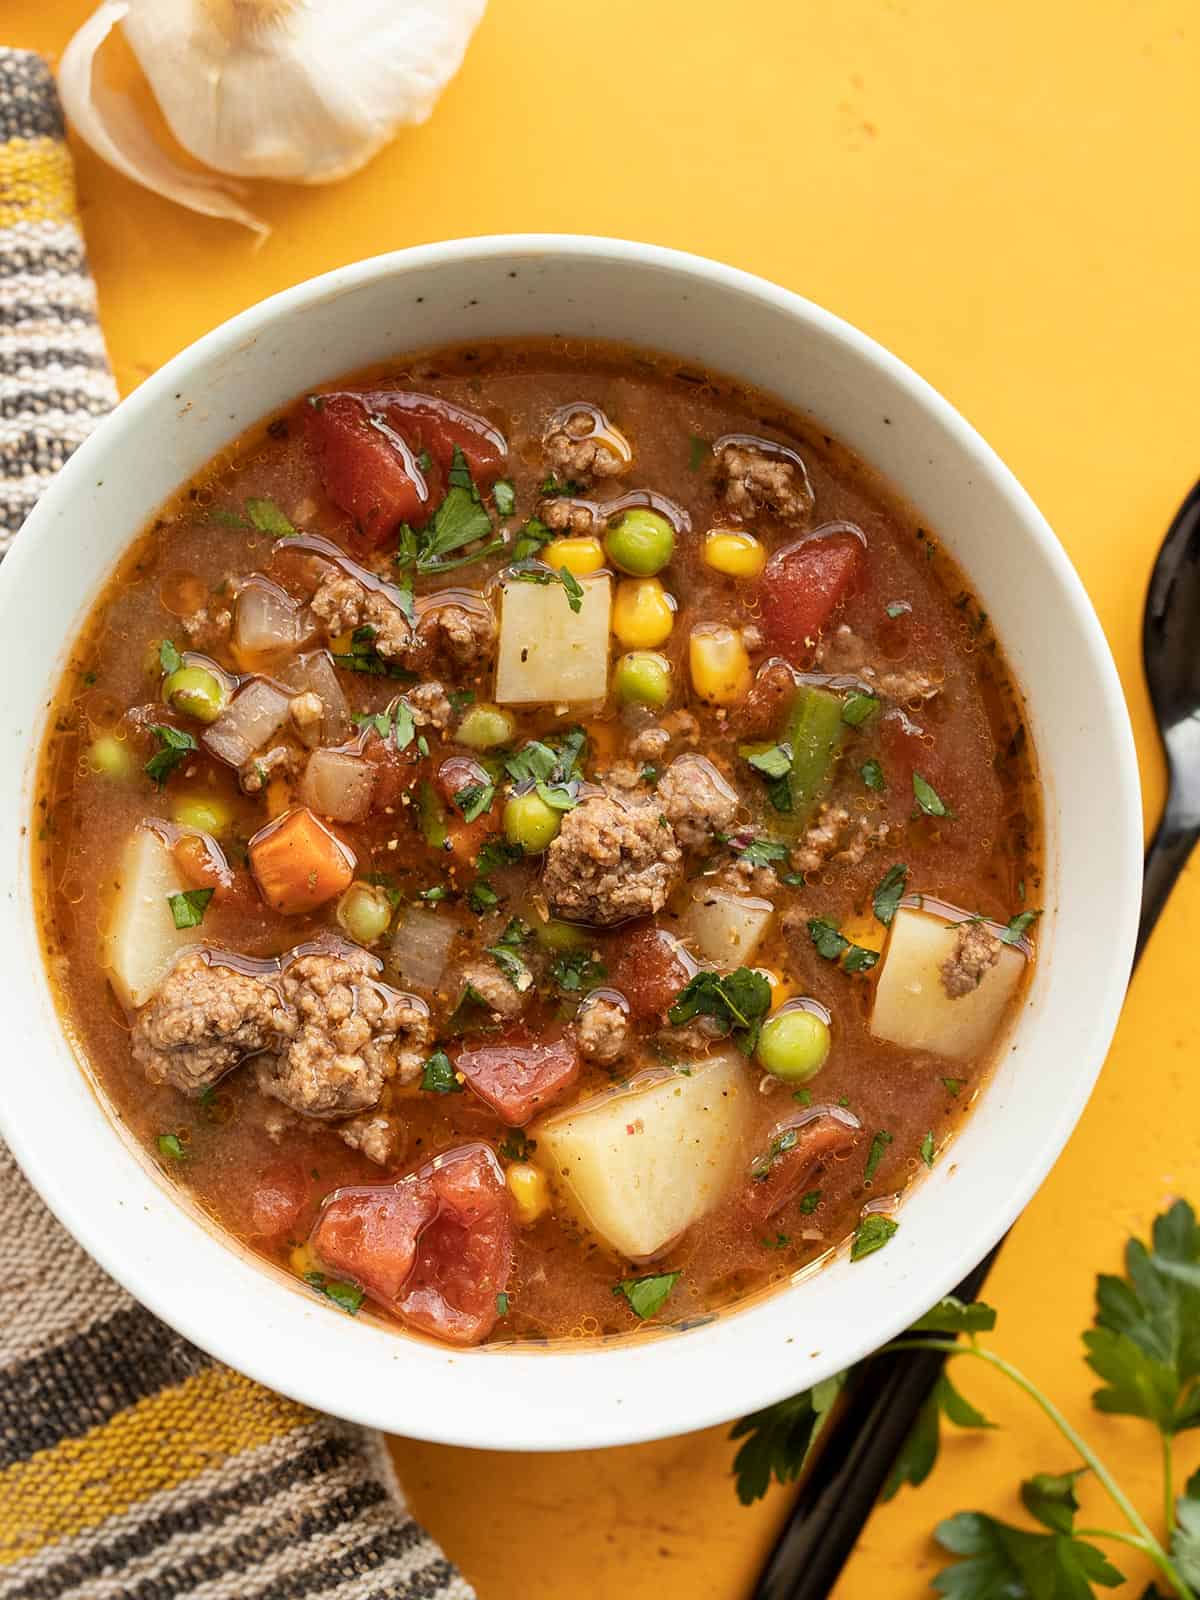 The 10 Most Popular Soup and Stew Recipes of 2022